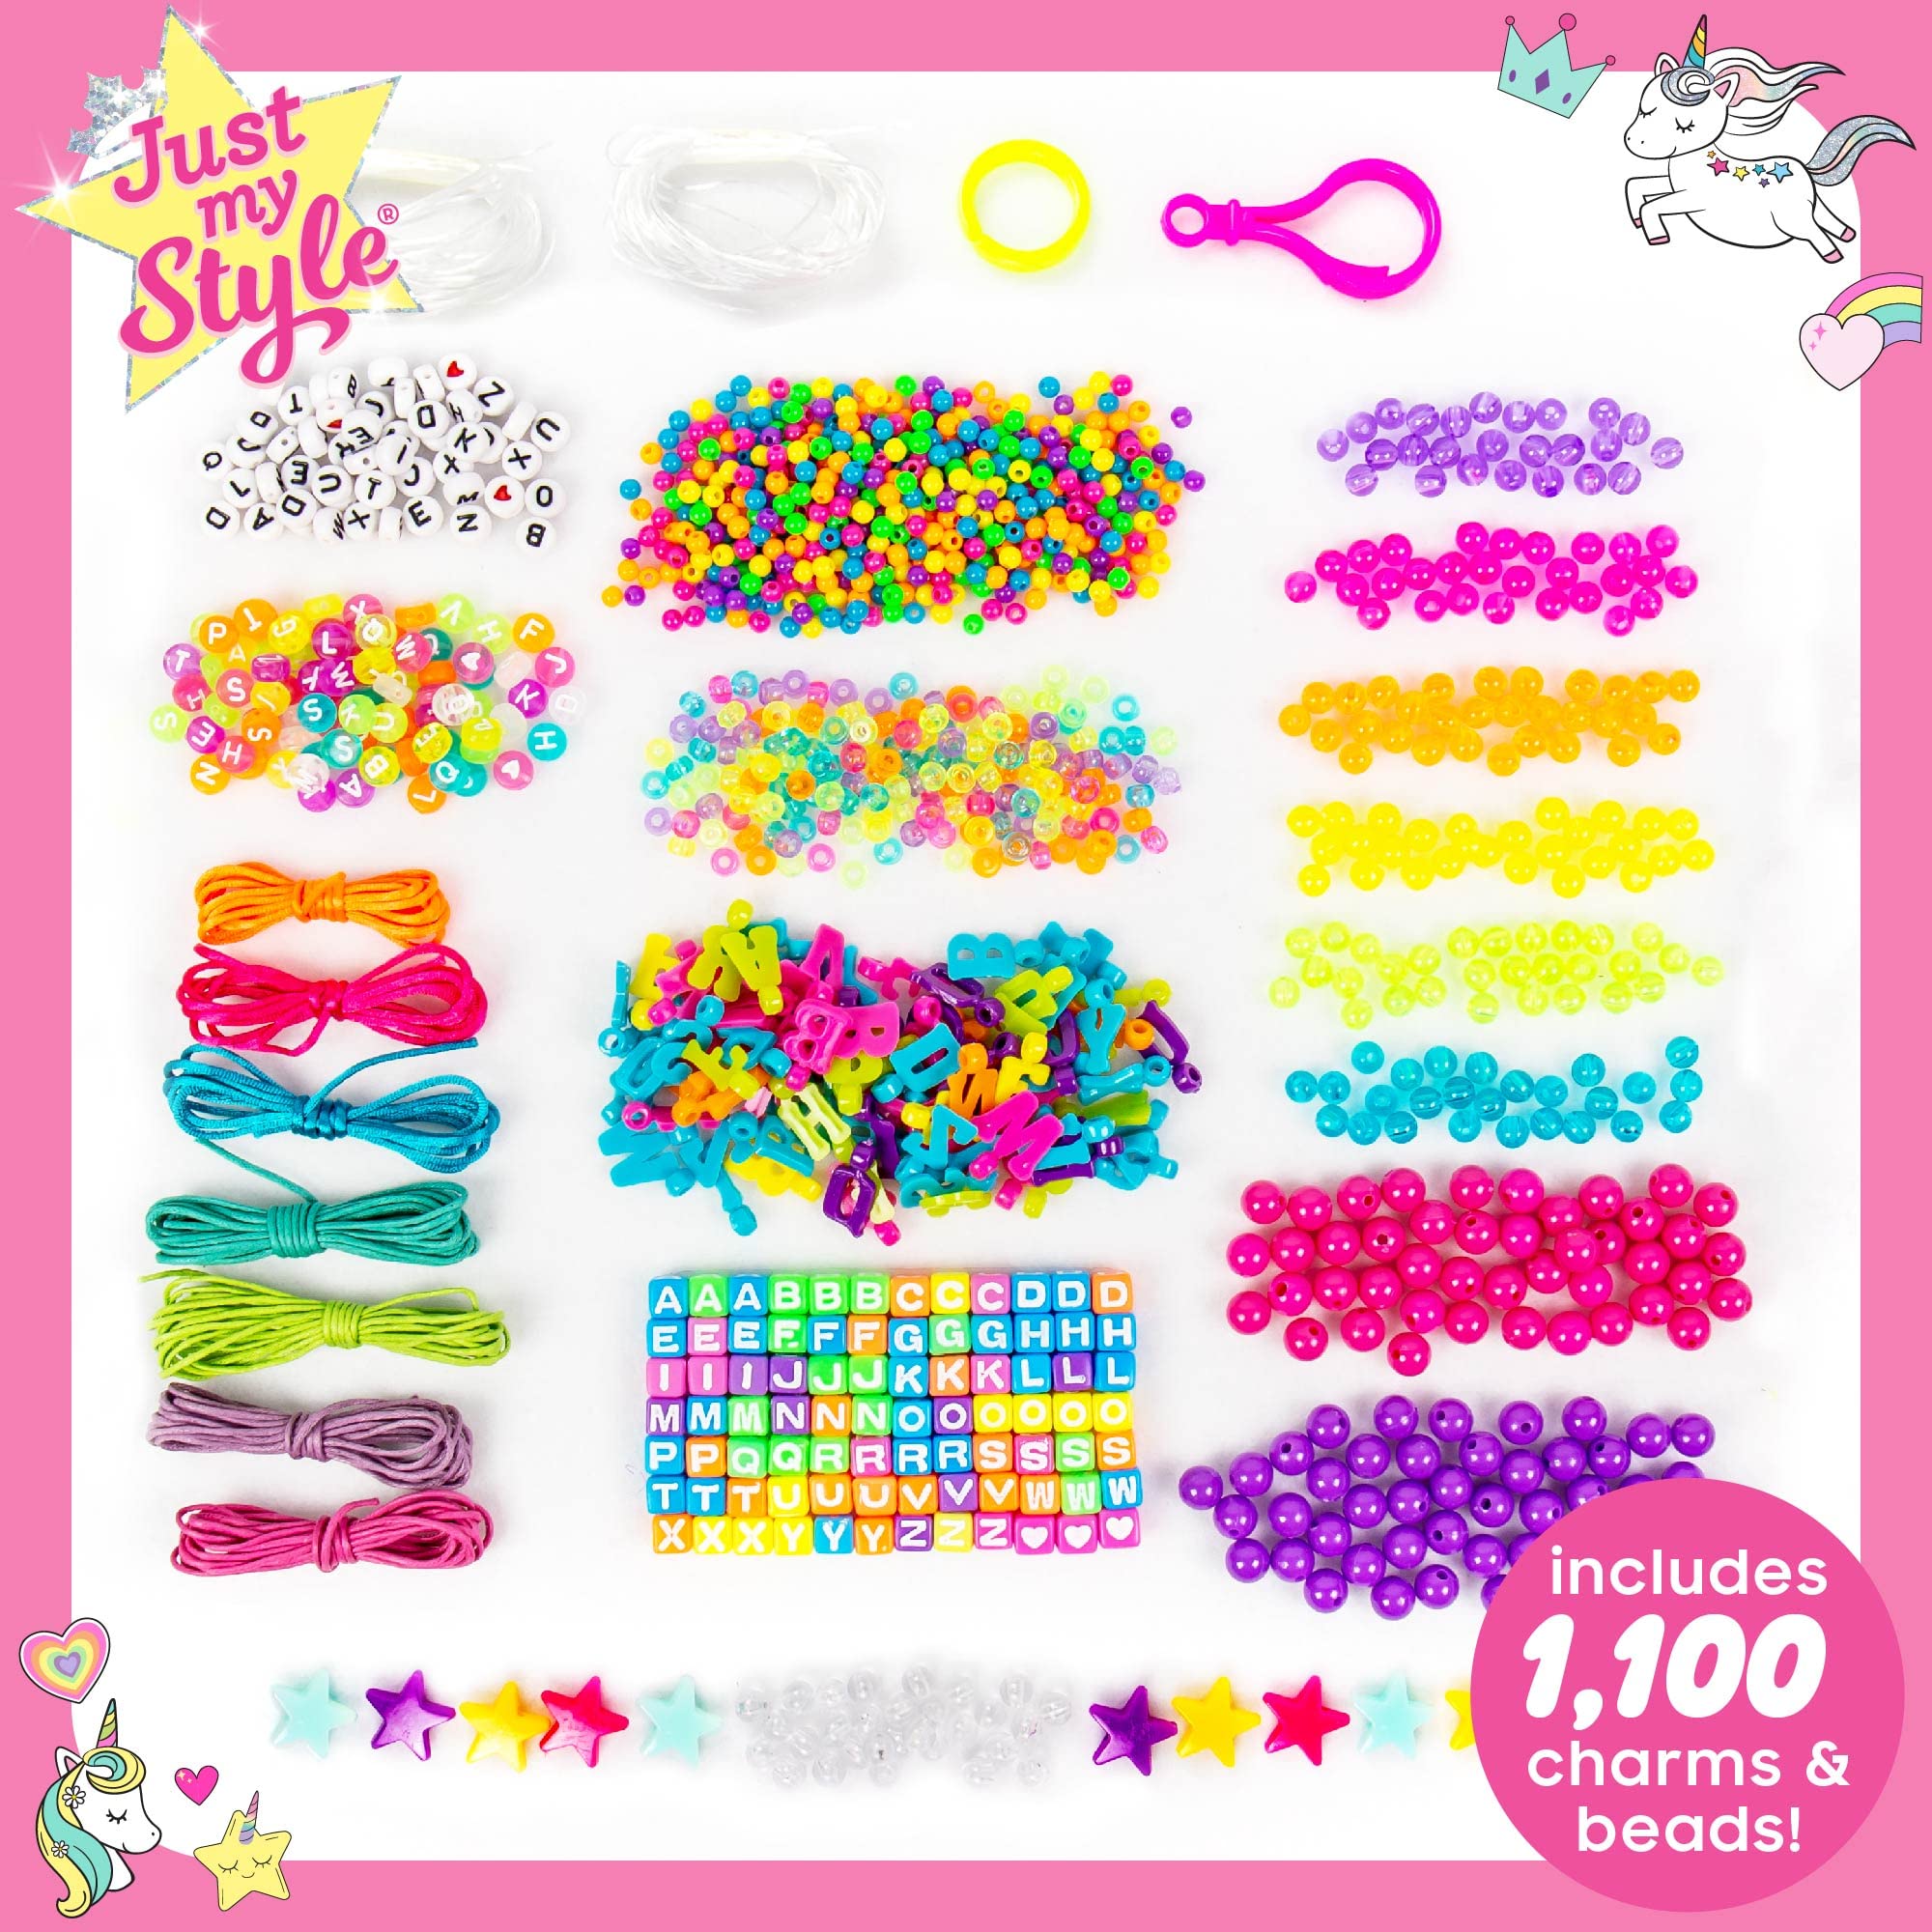 Just My Style ABC Beads by Horizon Group Usa, 1000+ Charms & Beads, Alphabet Charms, Accent Seed Star Wax Beading Cord, Satin Cord Key Ring Included, Bright